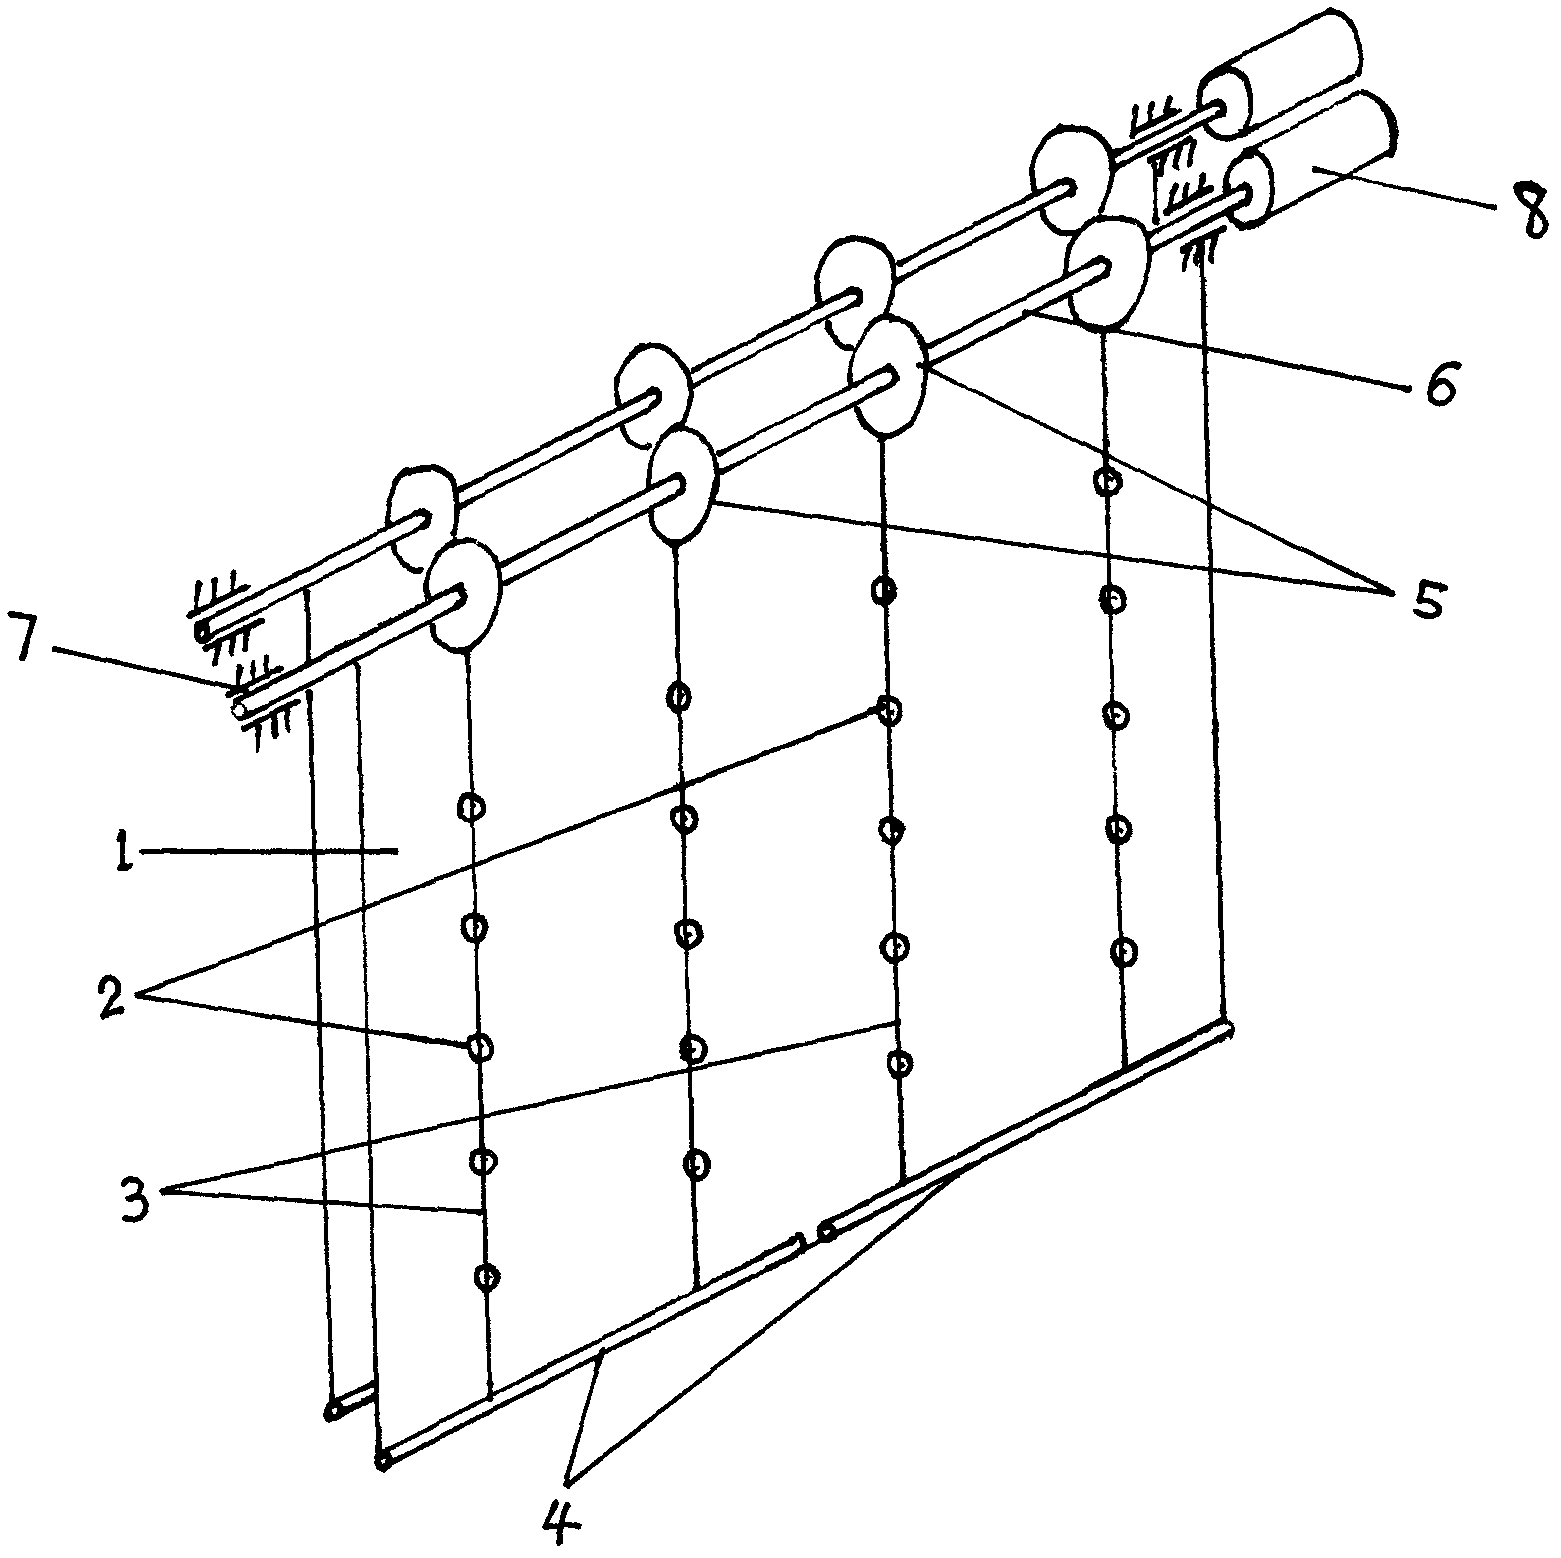 Large stage curtain starting device